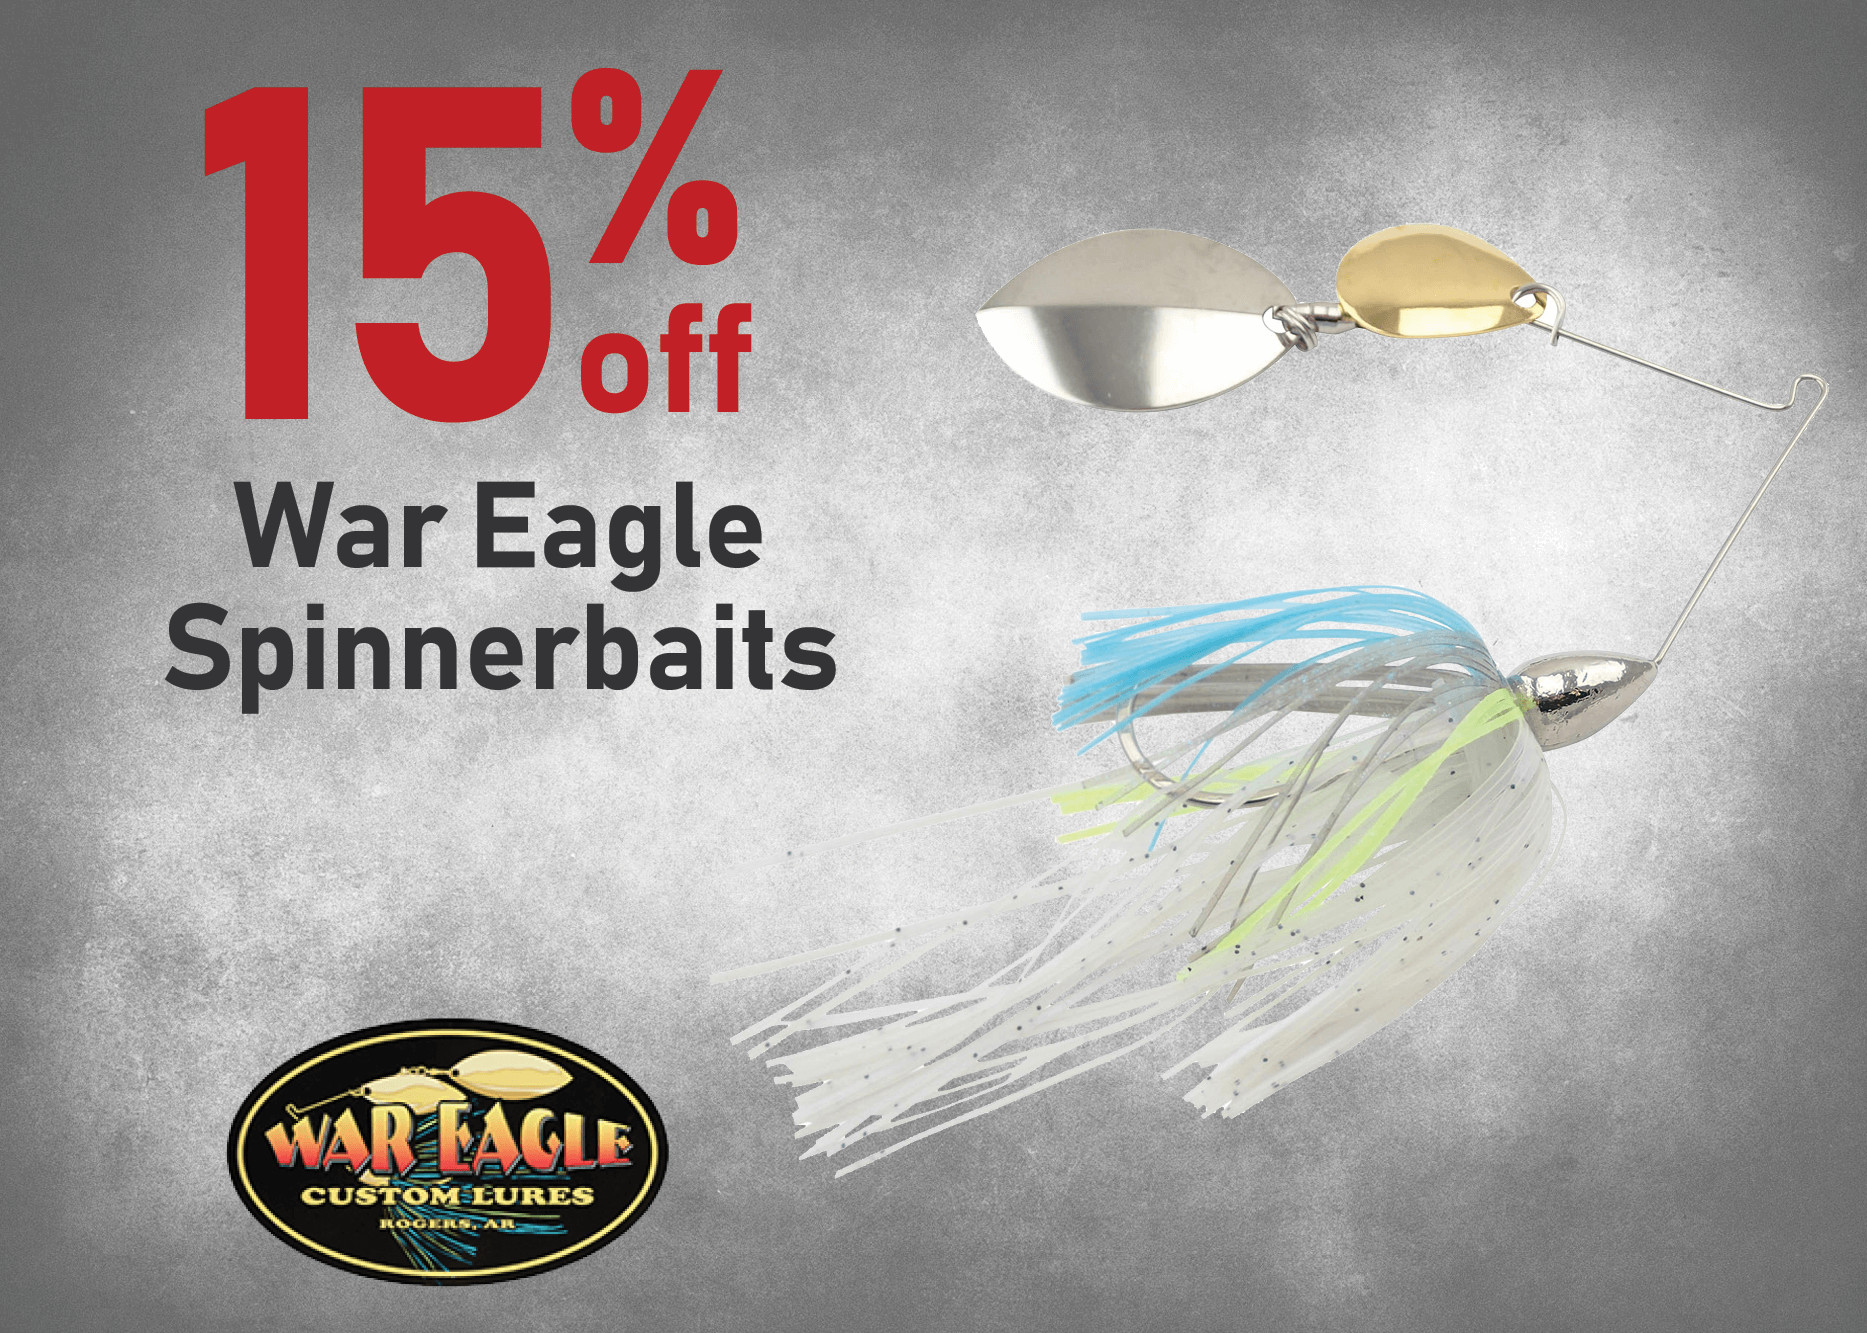 Save 15% on War Eagle Spinnerbaits